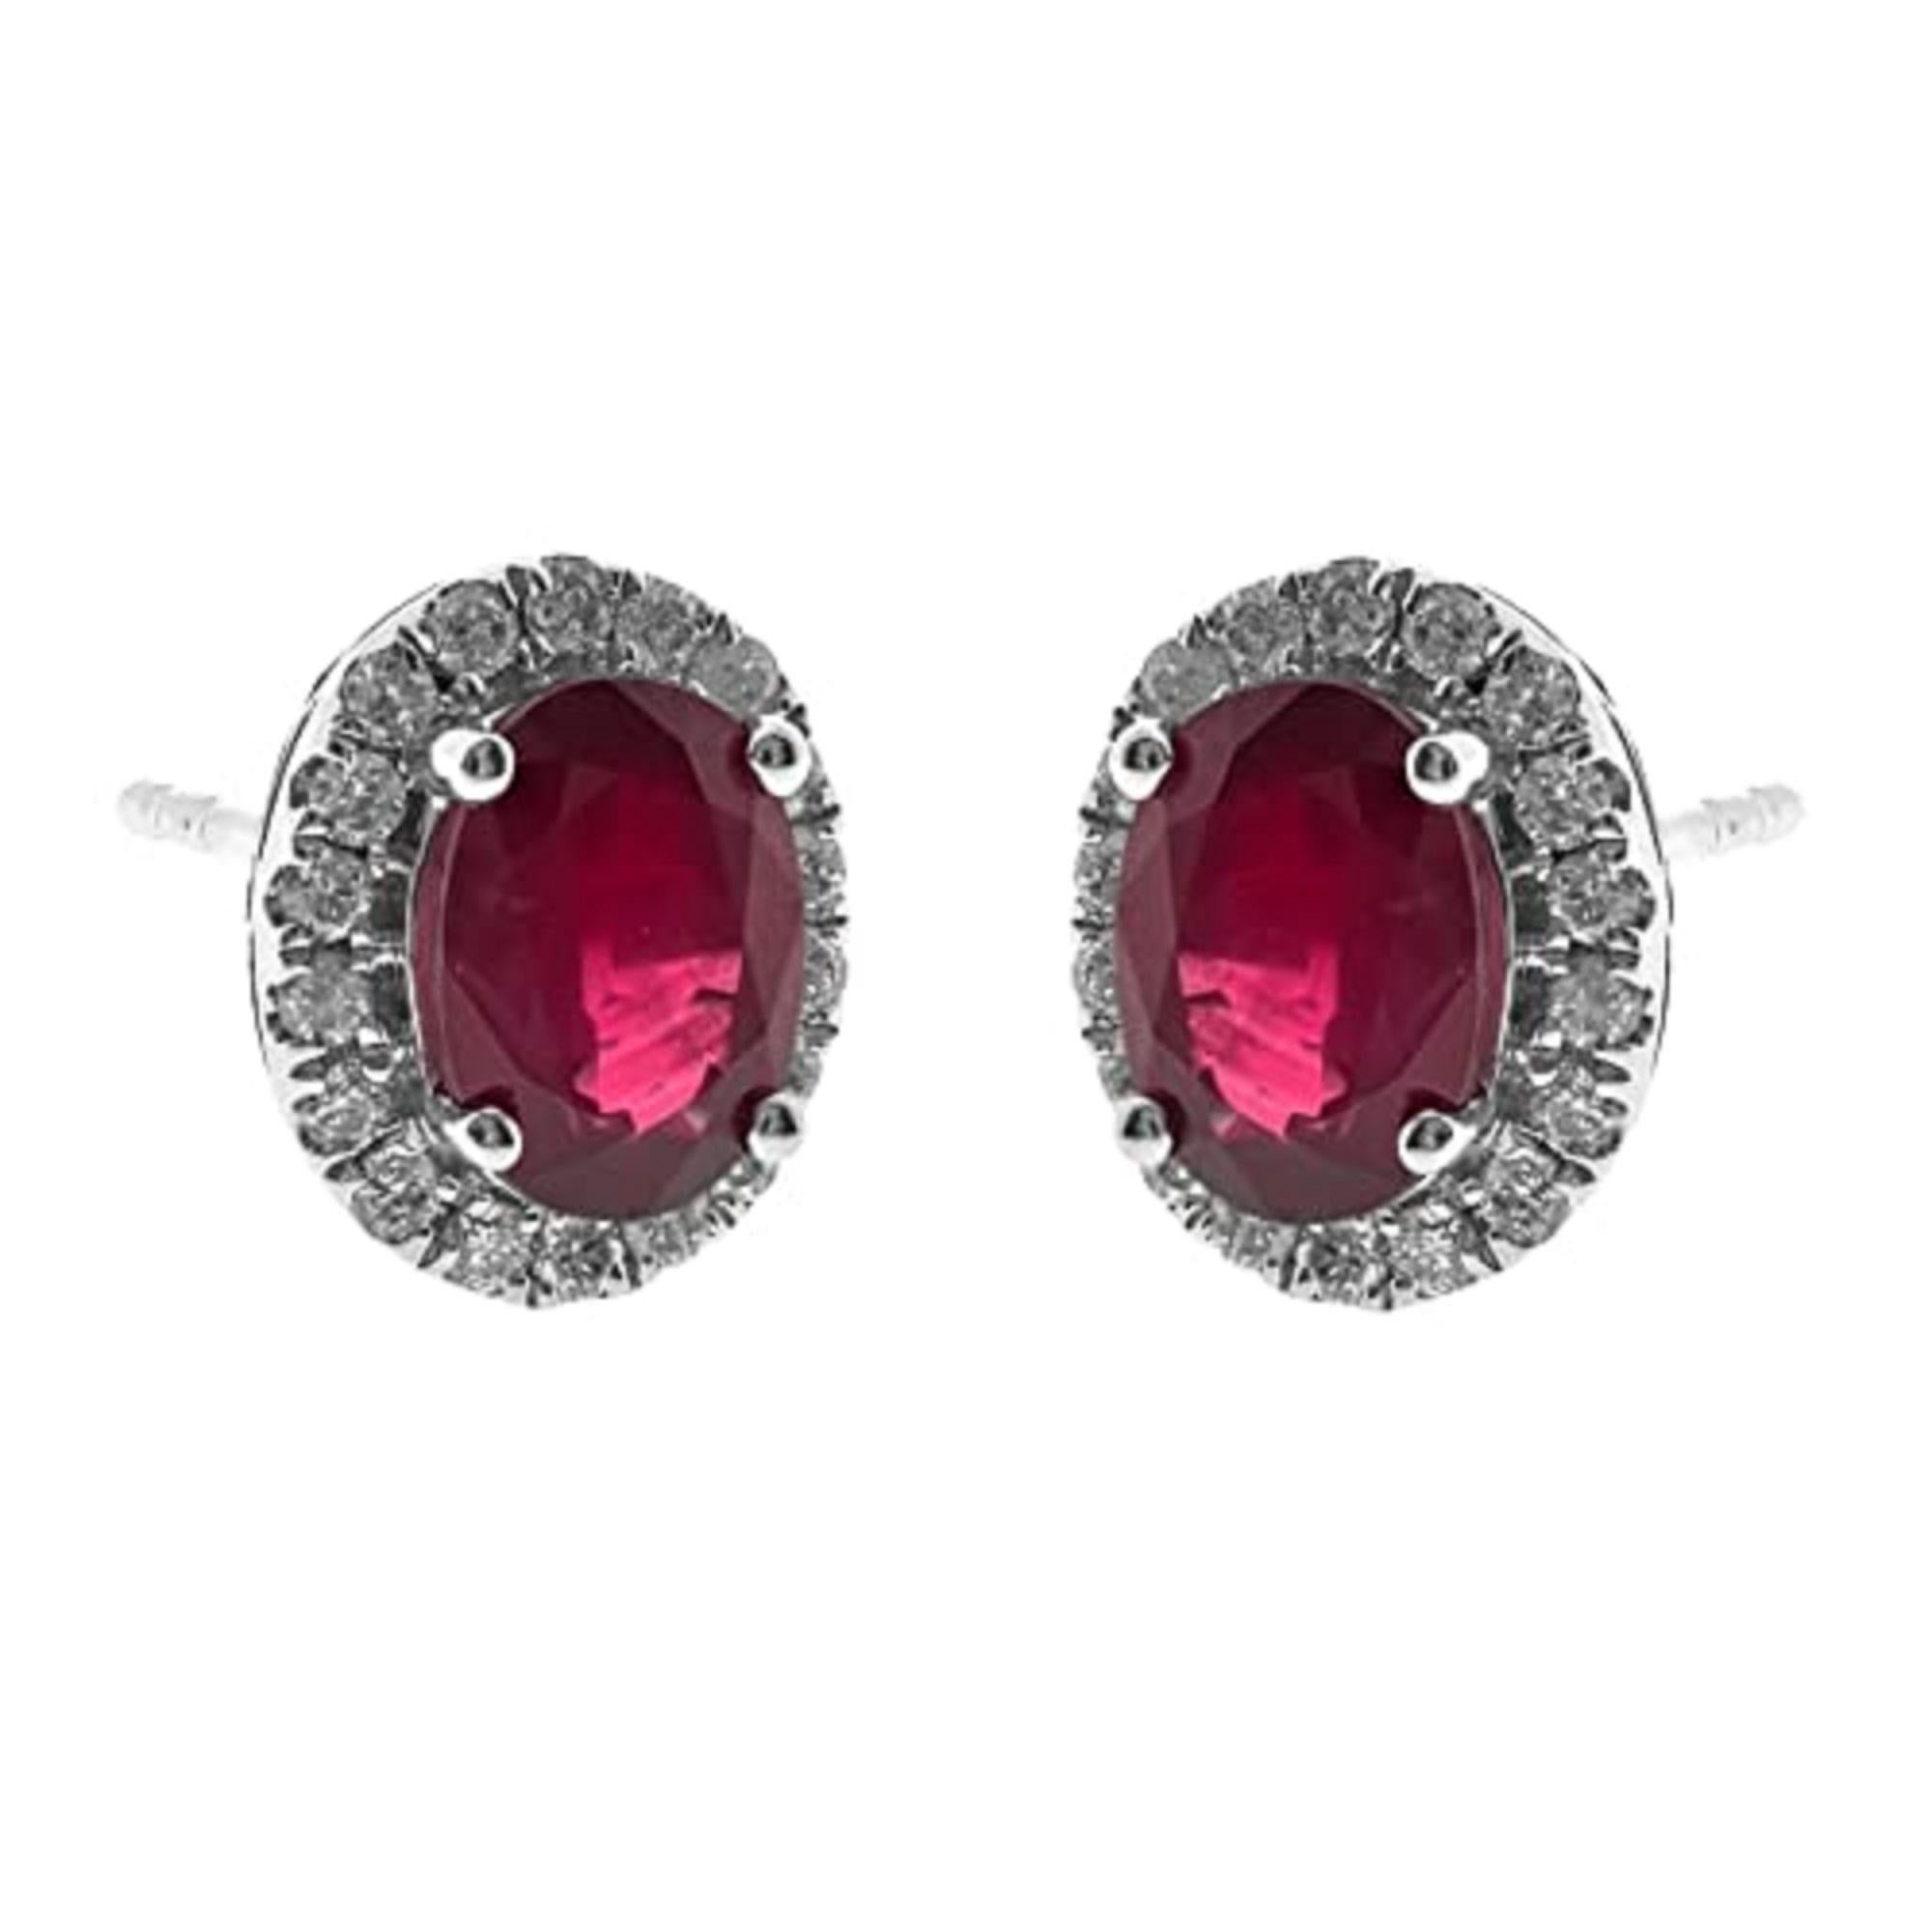 Art Deco Gin & Grace 10K White Gold Mozambique Ruby Earrings with Diamonds for women For Sale